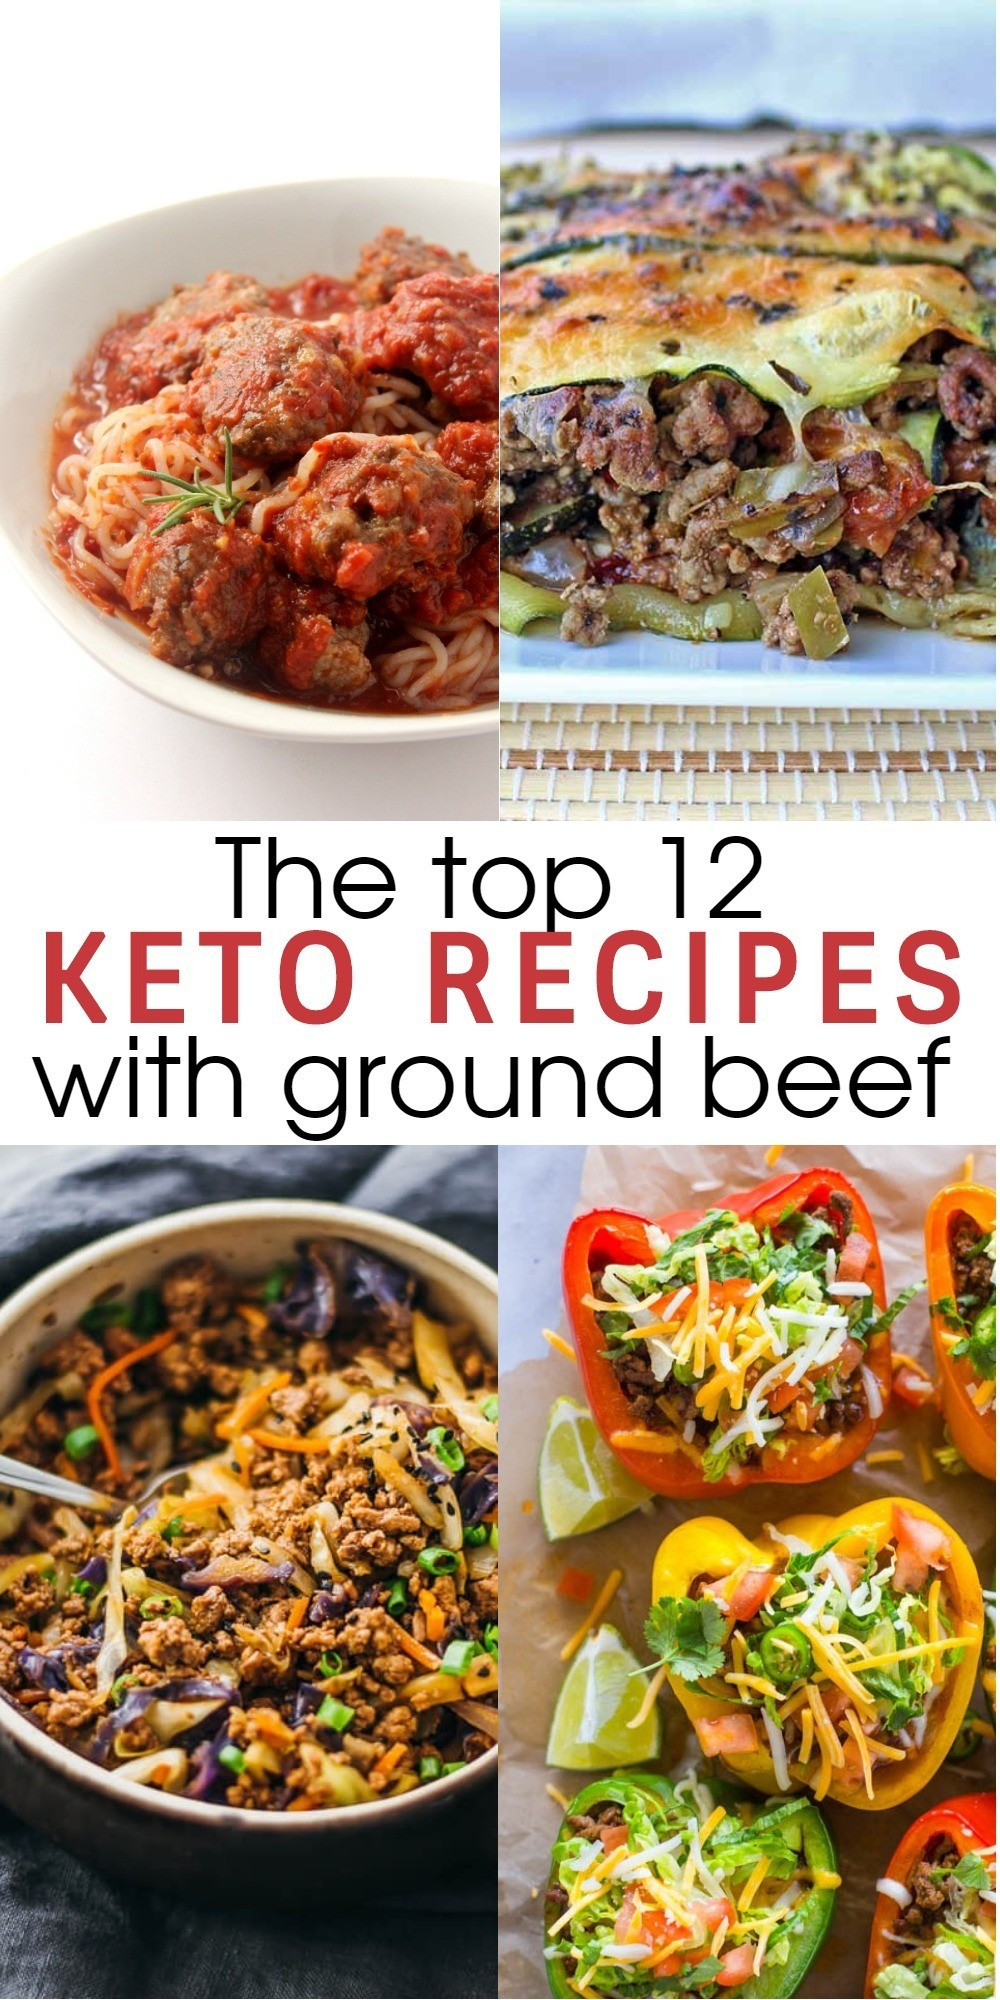 Ground Beef Recipes For Dinner Healthy Keto
 12 Flavorful and Easy Keto Recipes With Ground Beef To Try